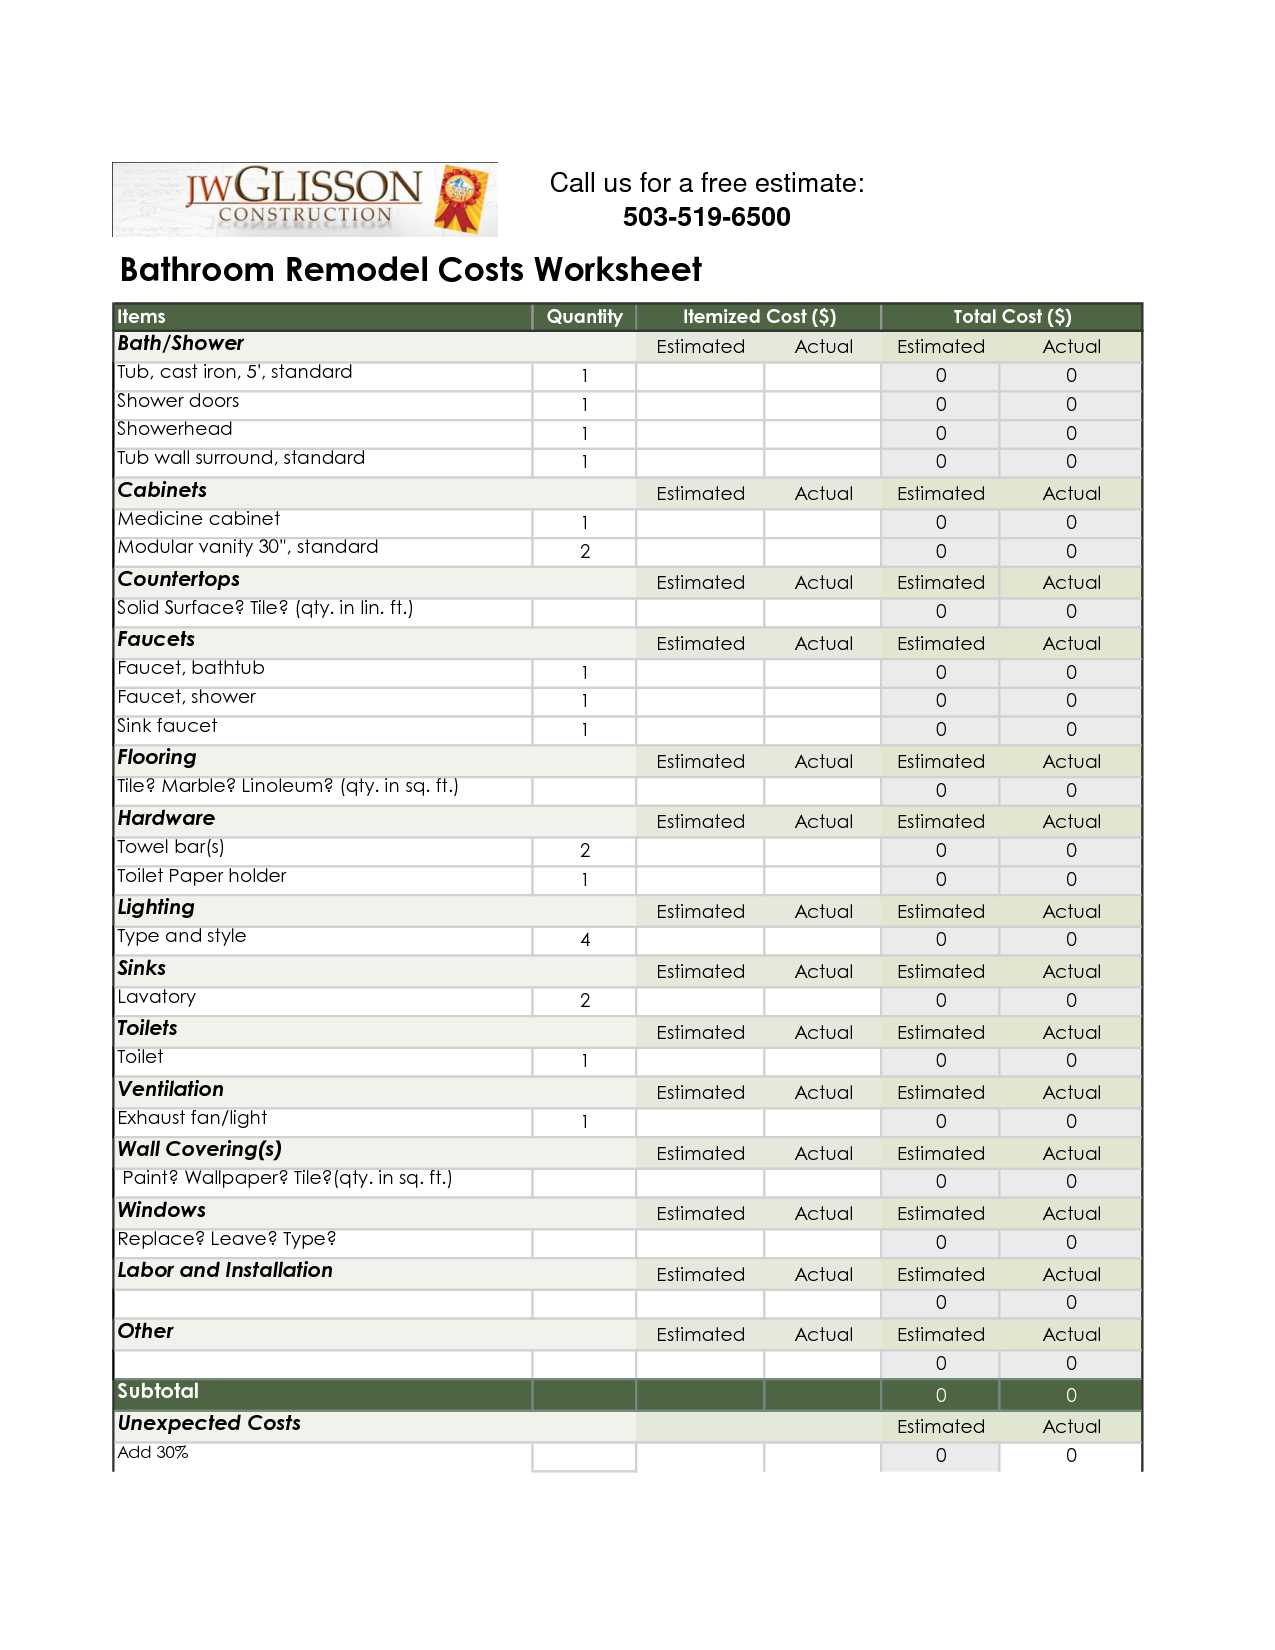 Home Construction Budget Worksheet together with Cost Bathroom Remodel Jw Glisson Construction